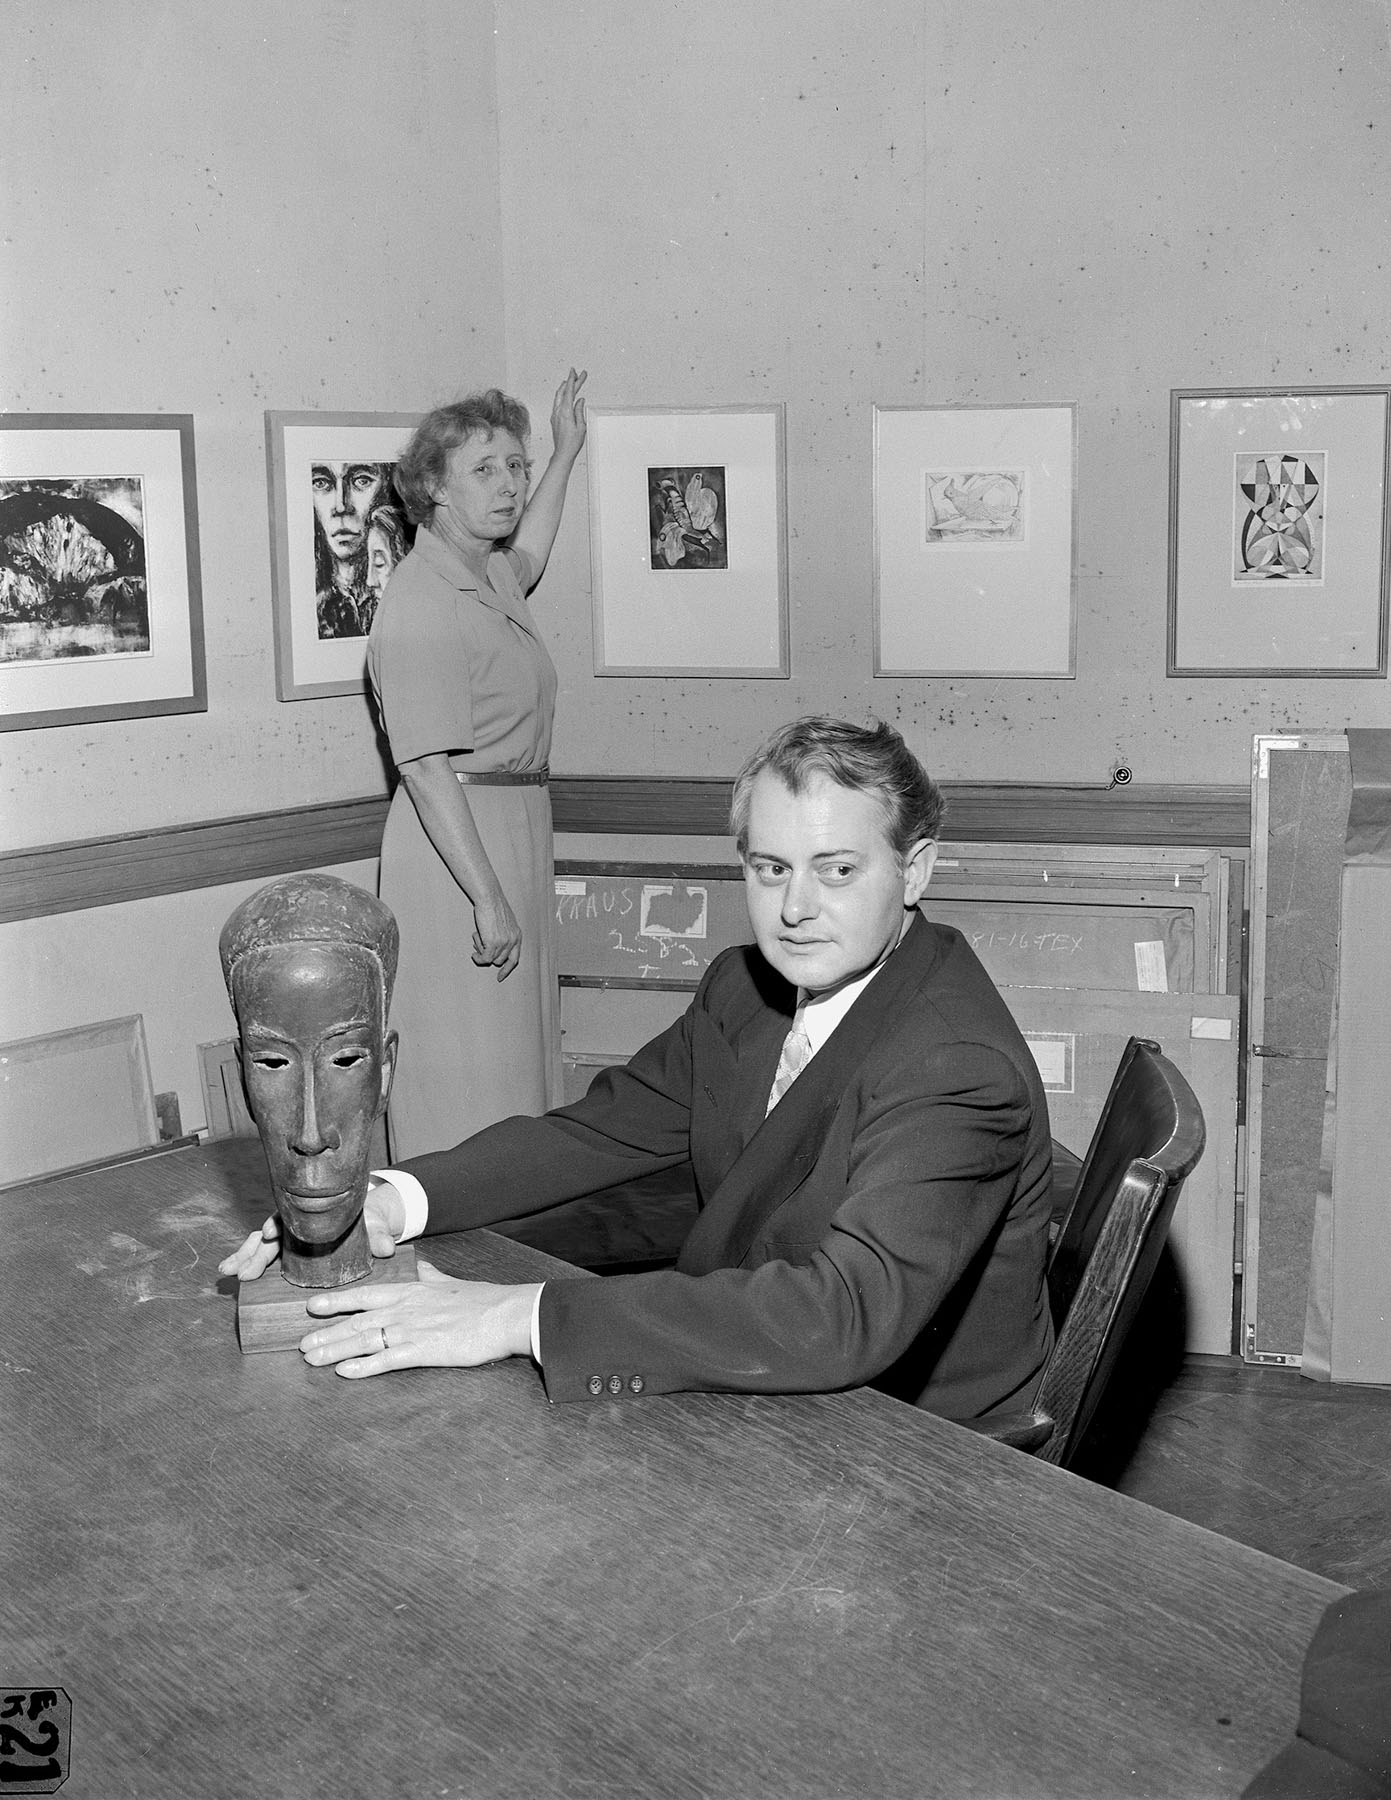 Black-and-white photo of a woman standing next to framed artwork on the wall and a man sitting at a table holding a sculpture.